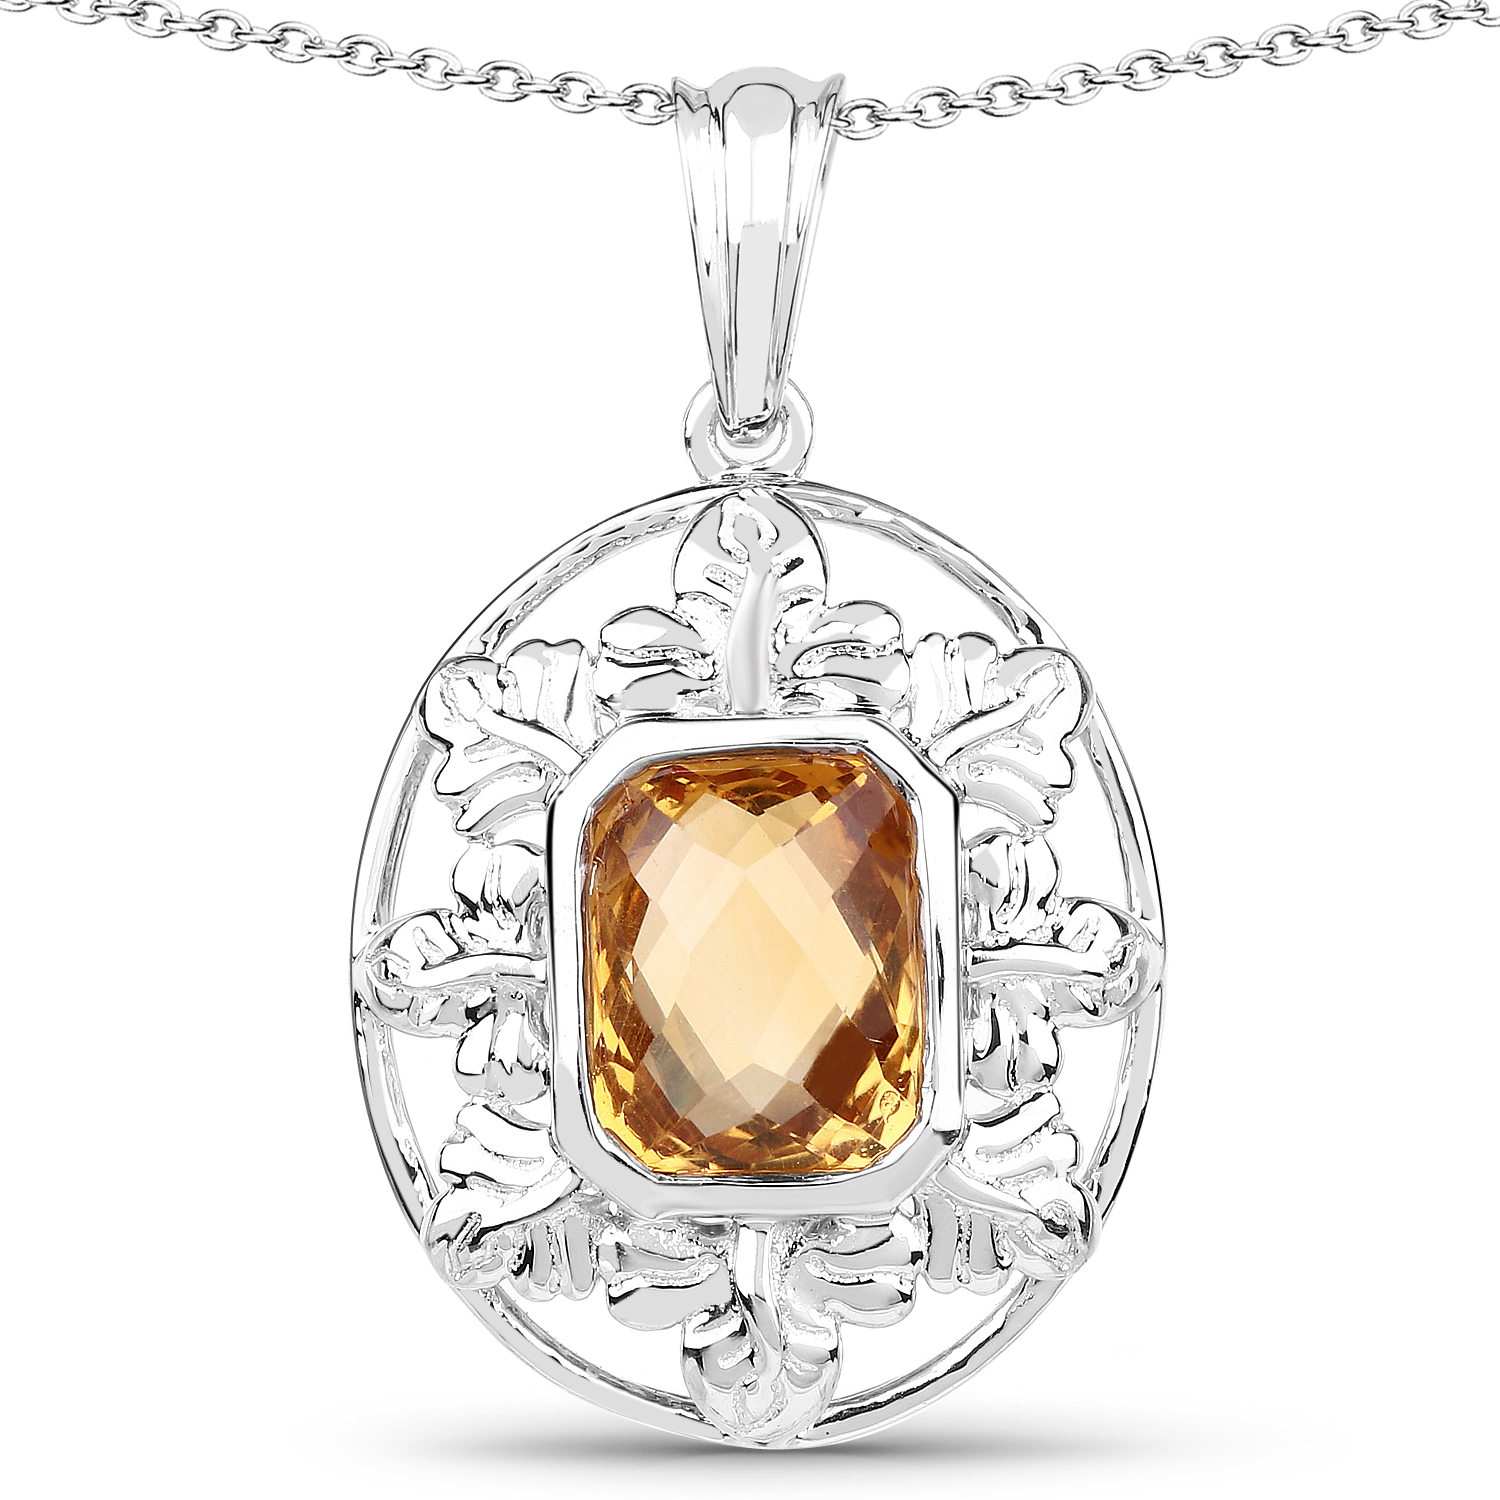 Details about  / Tourmaline Citrine 925 Sterling Silver Jewelry Necklace 18/"  GP-3211-3220